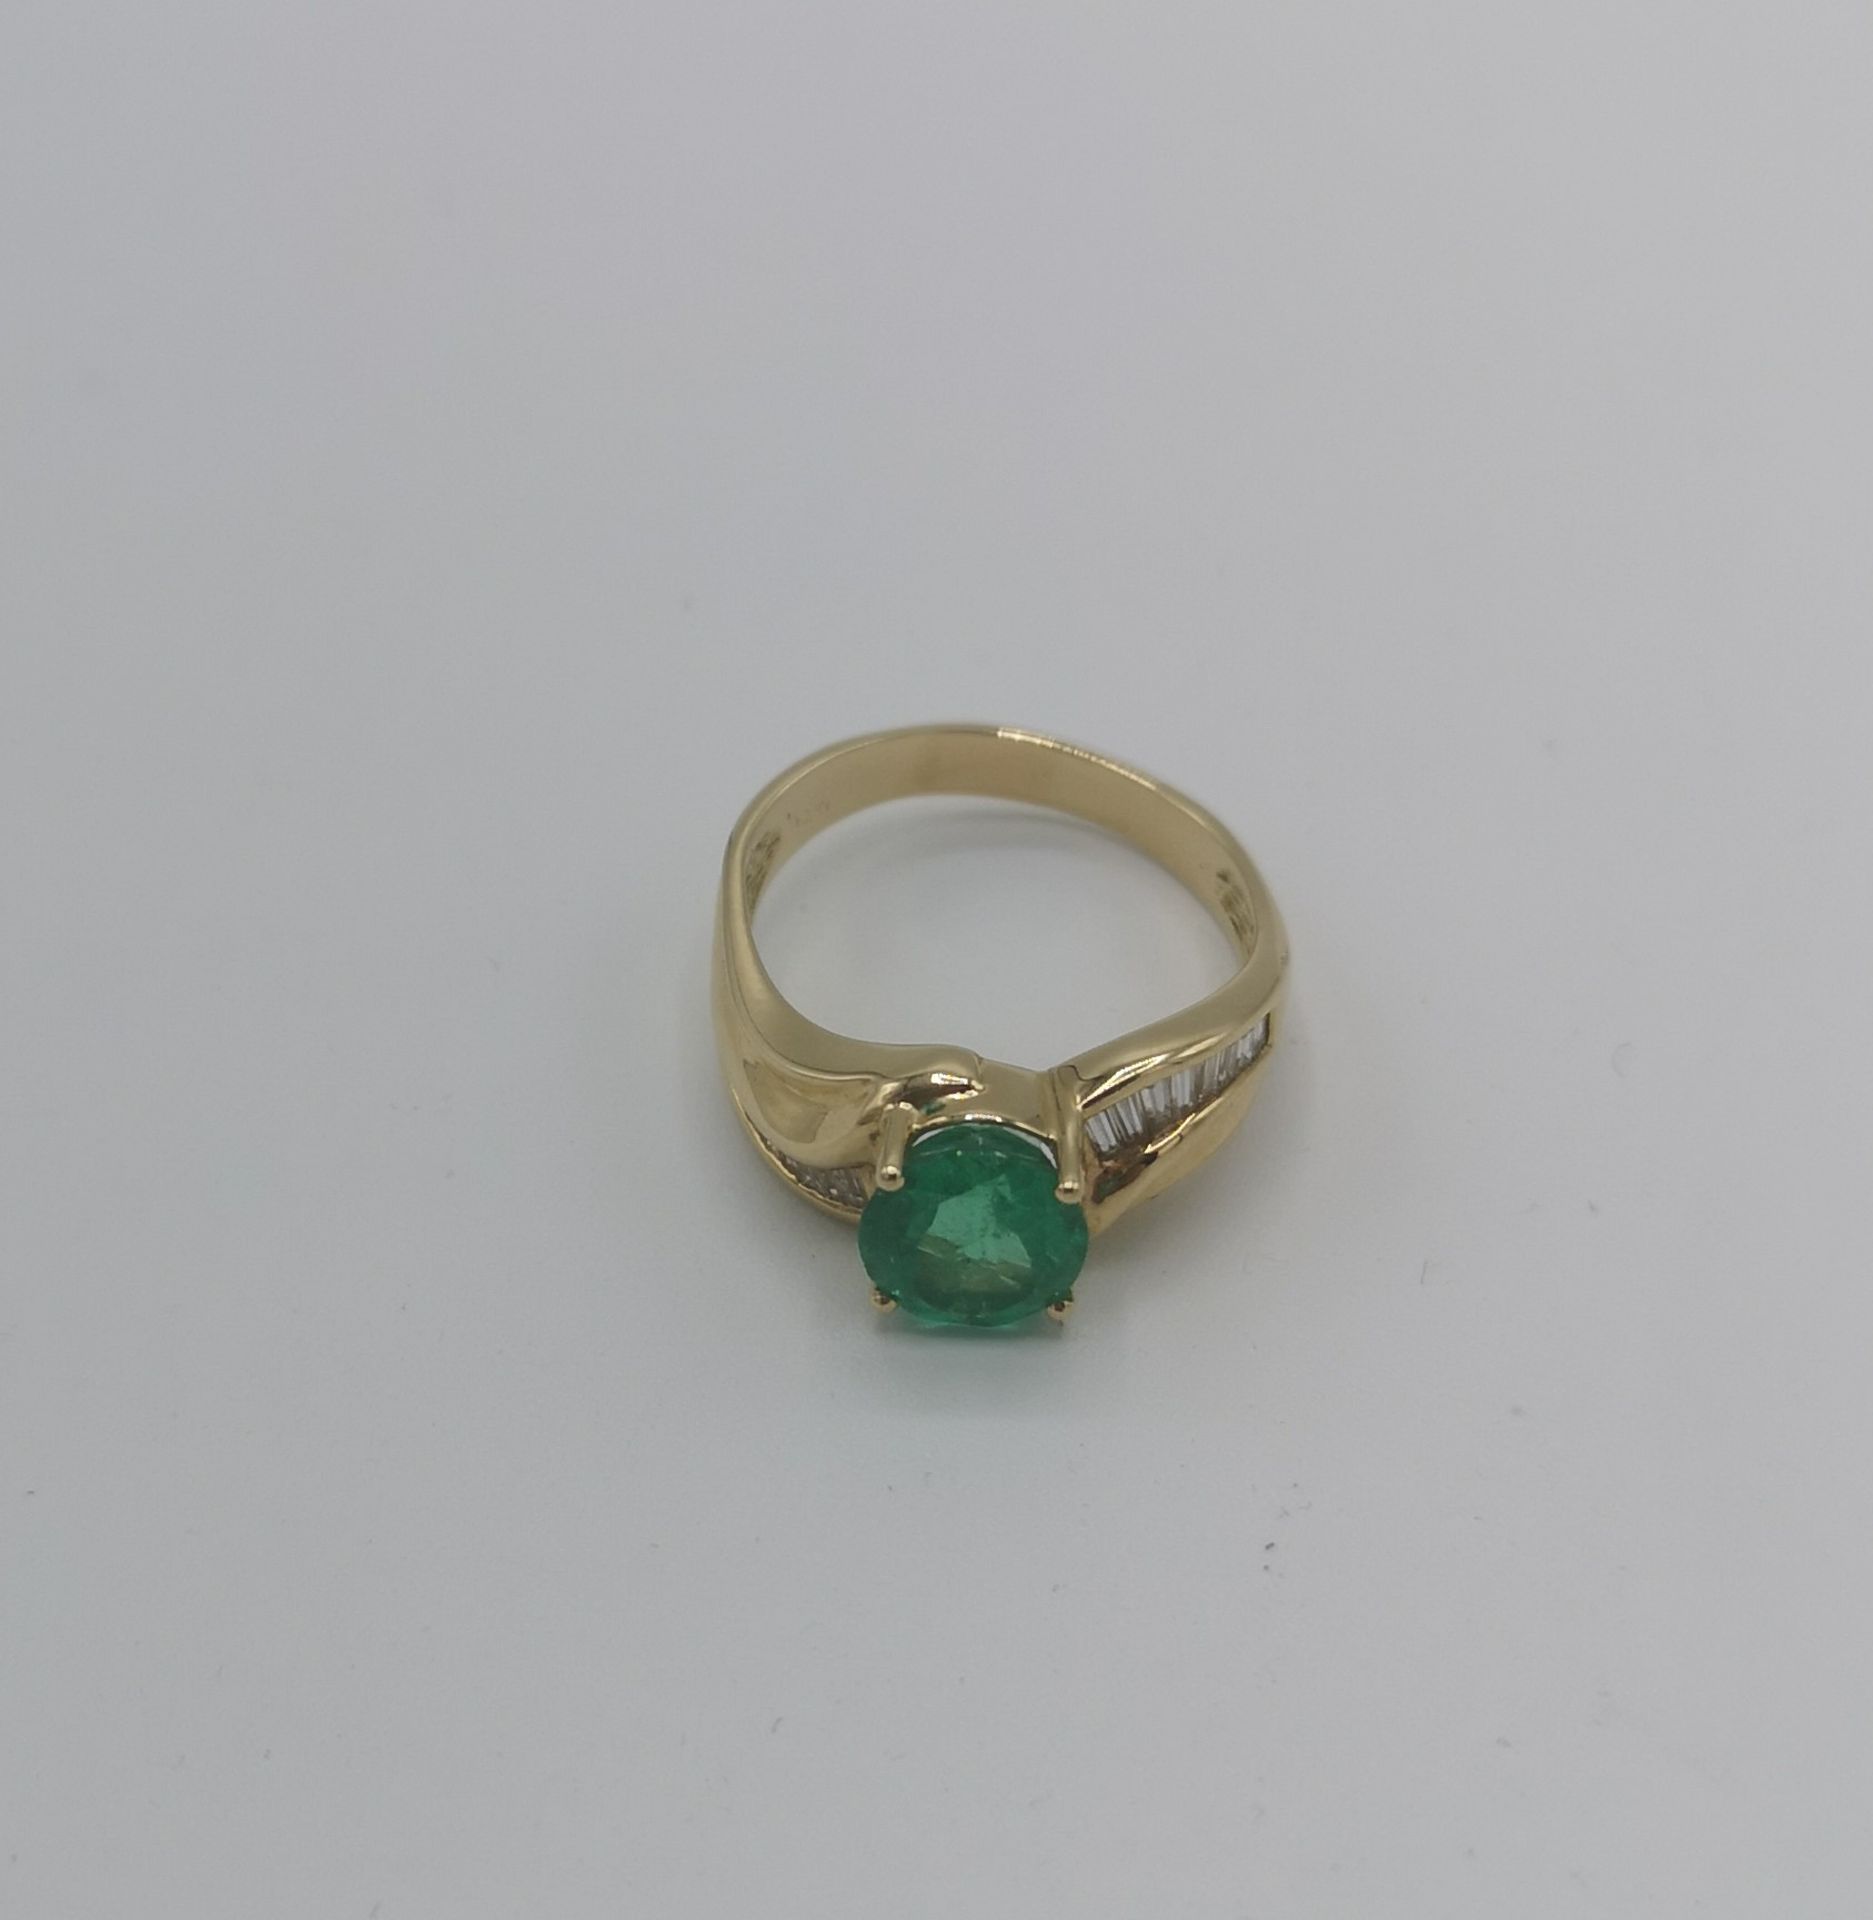 Emerald and diamond ring - Image 4 of 4